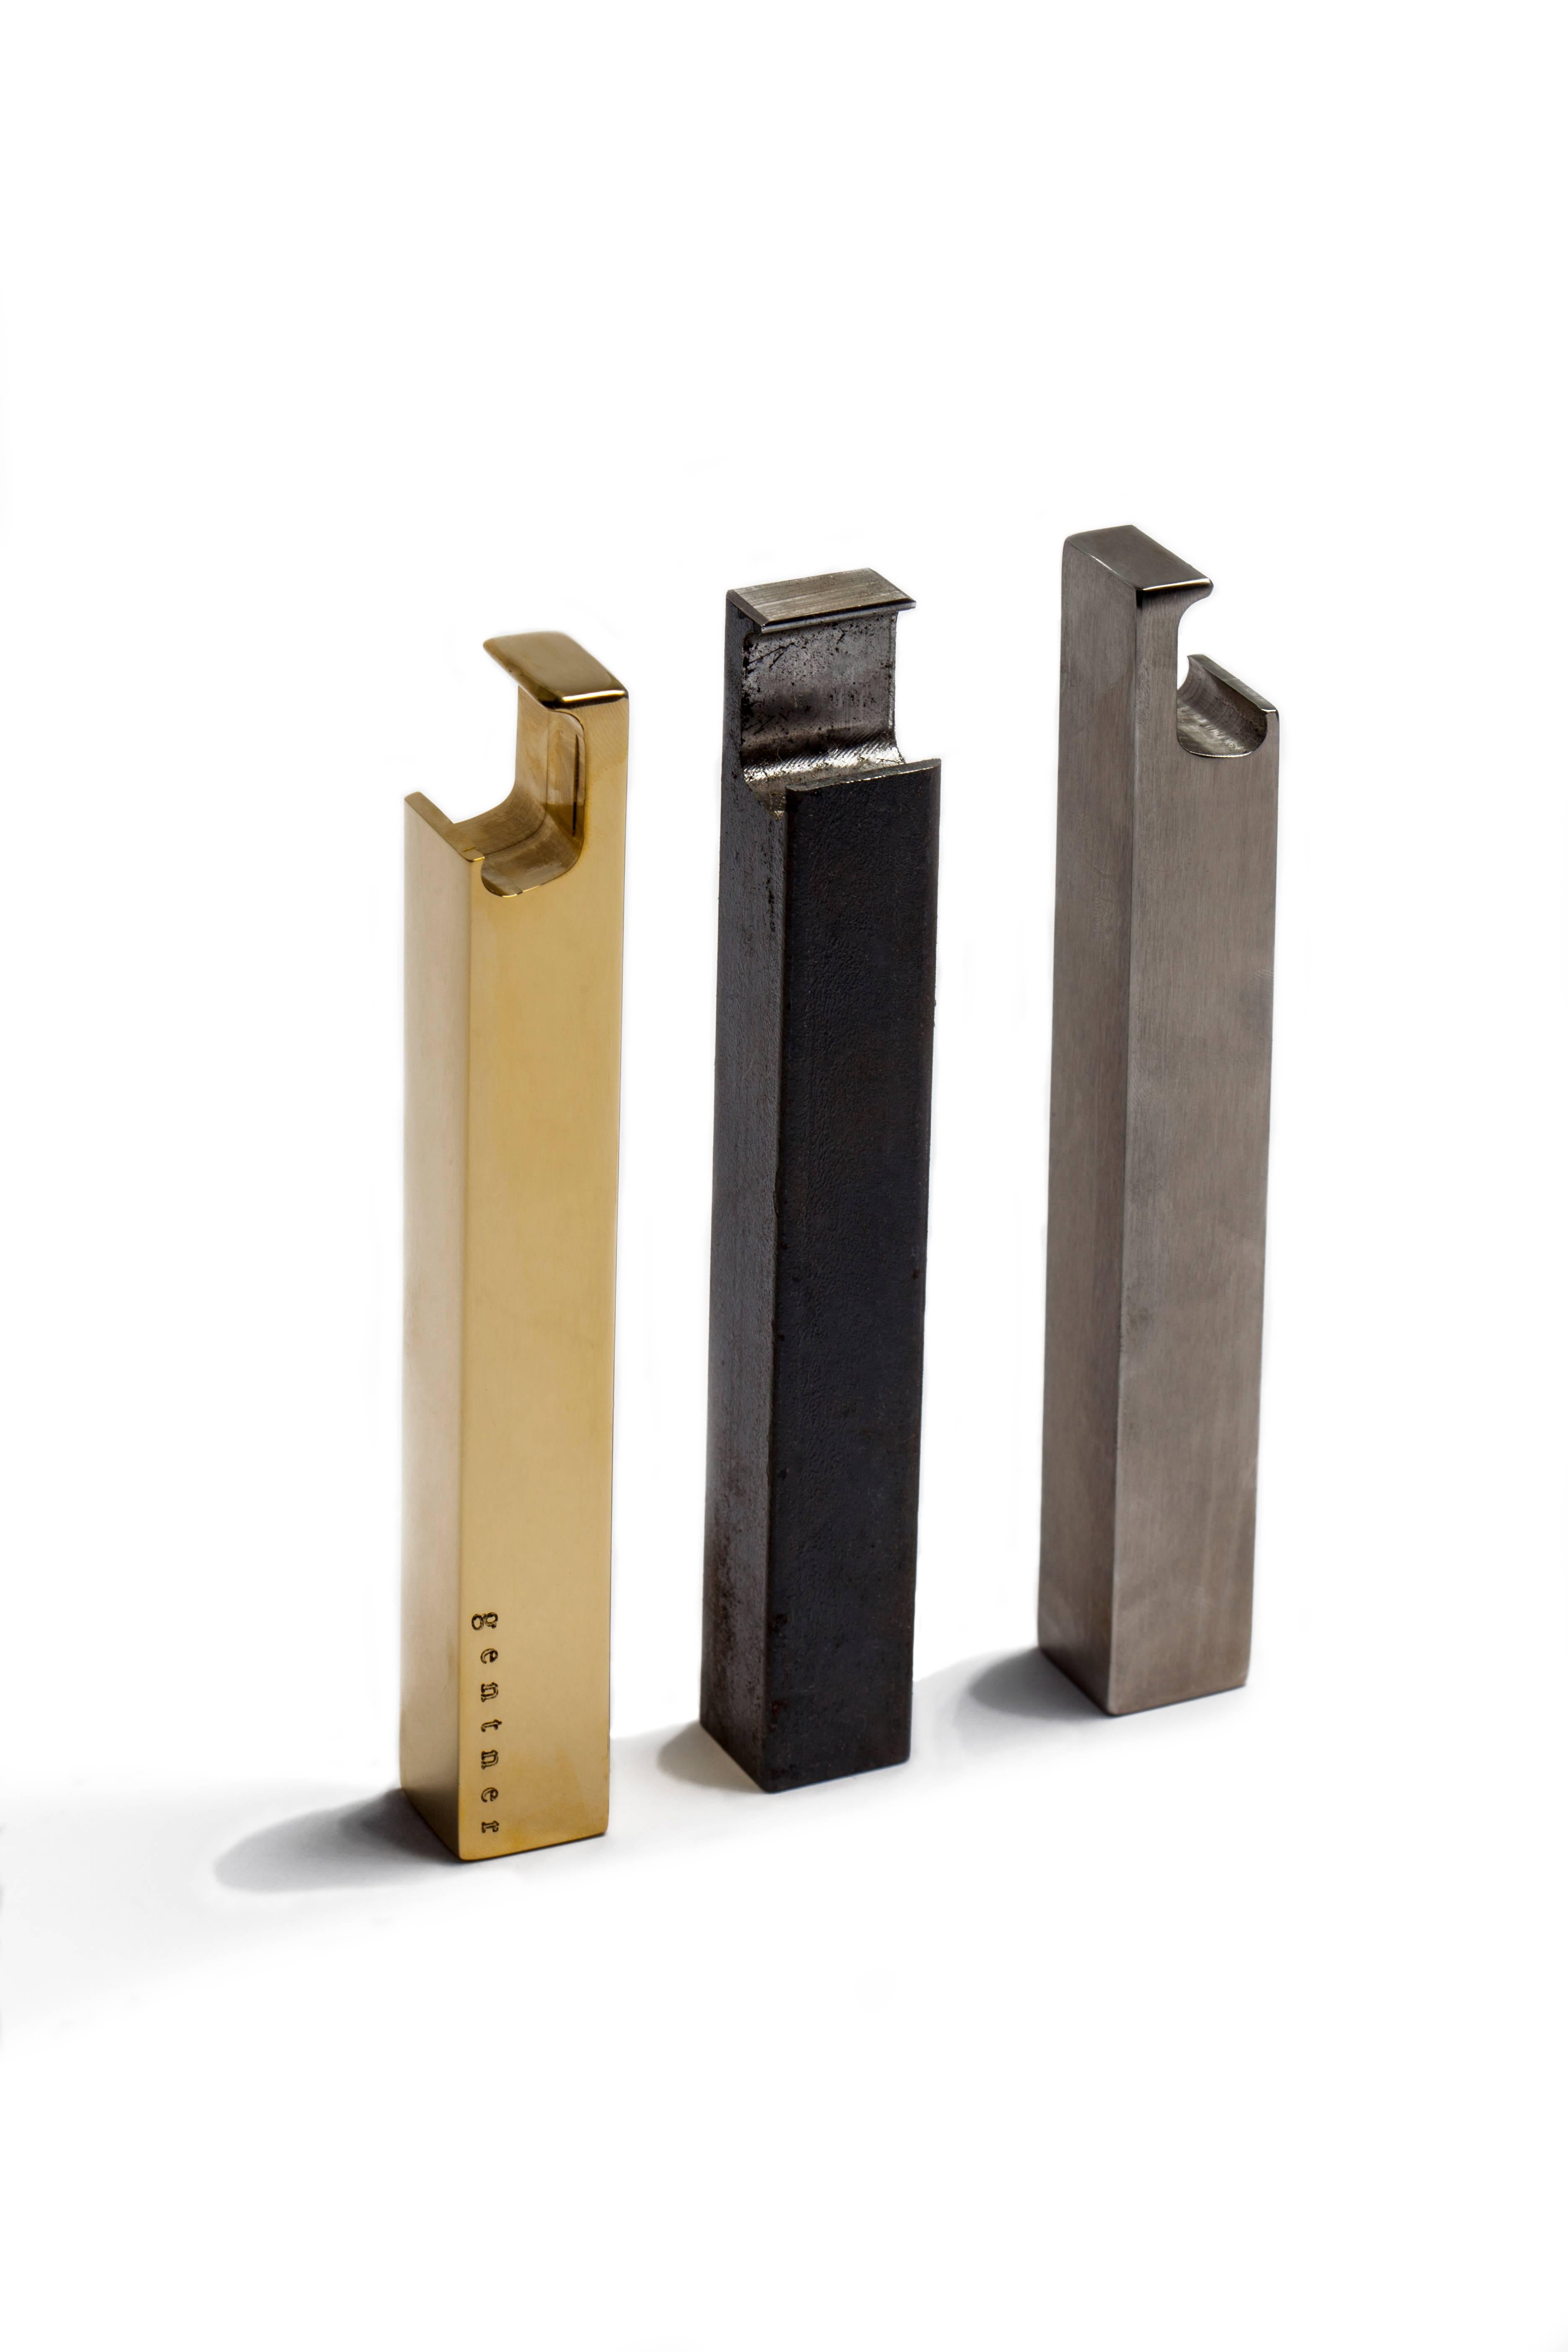 Strong in form and heavy in weight, the bottle openers are elegant in their simplicity and precision. Solid bar stock is transformed through the most minimal intervention possible, creating an object that is highly functional requiring only the